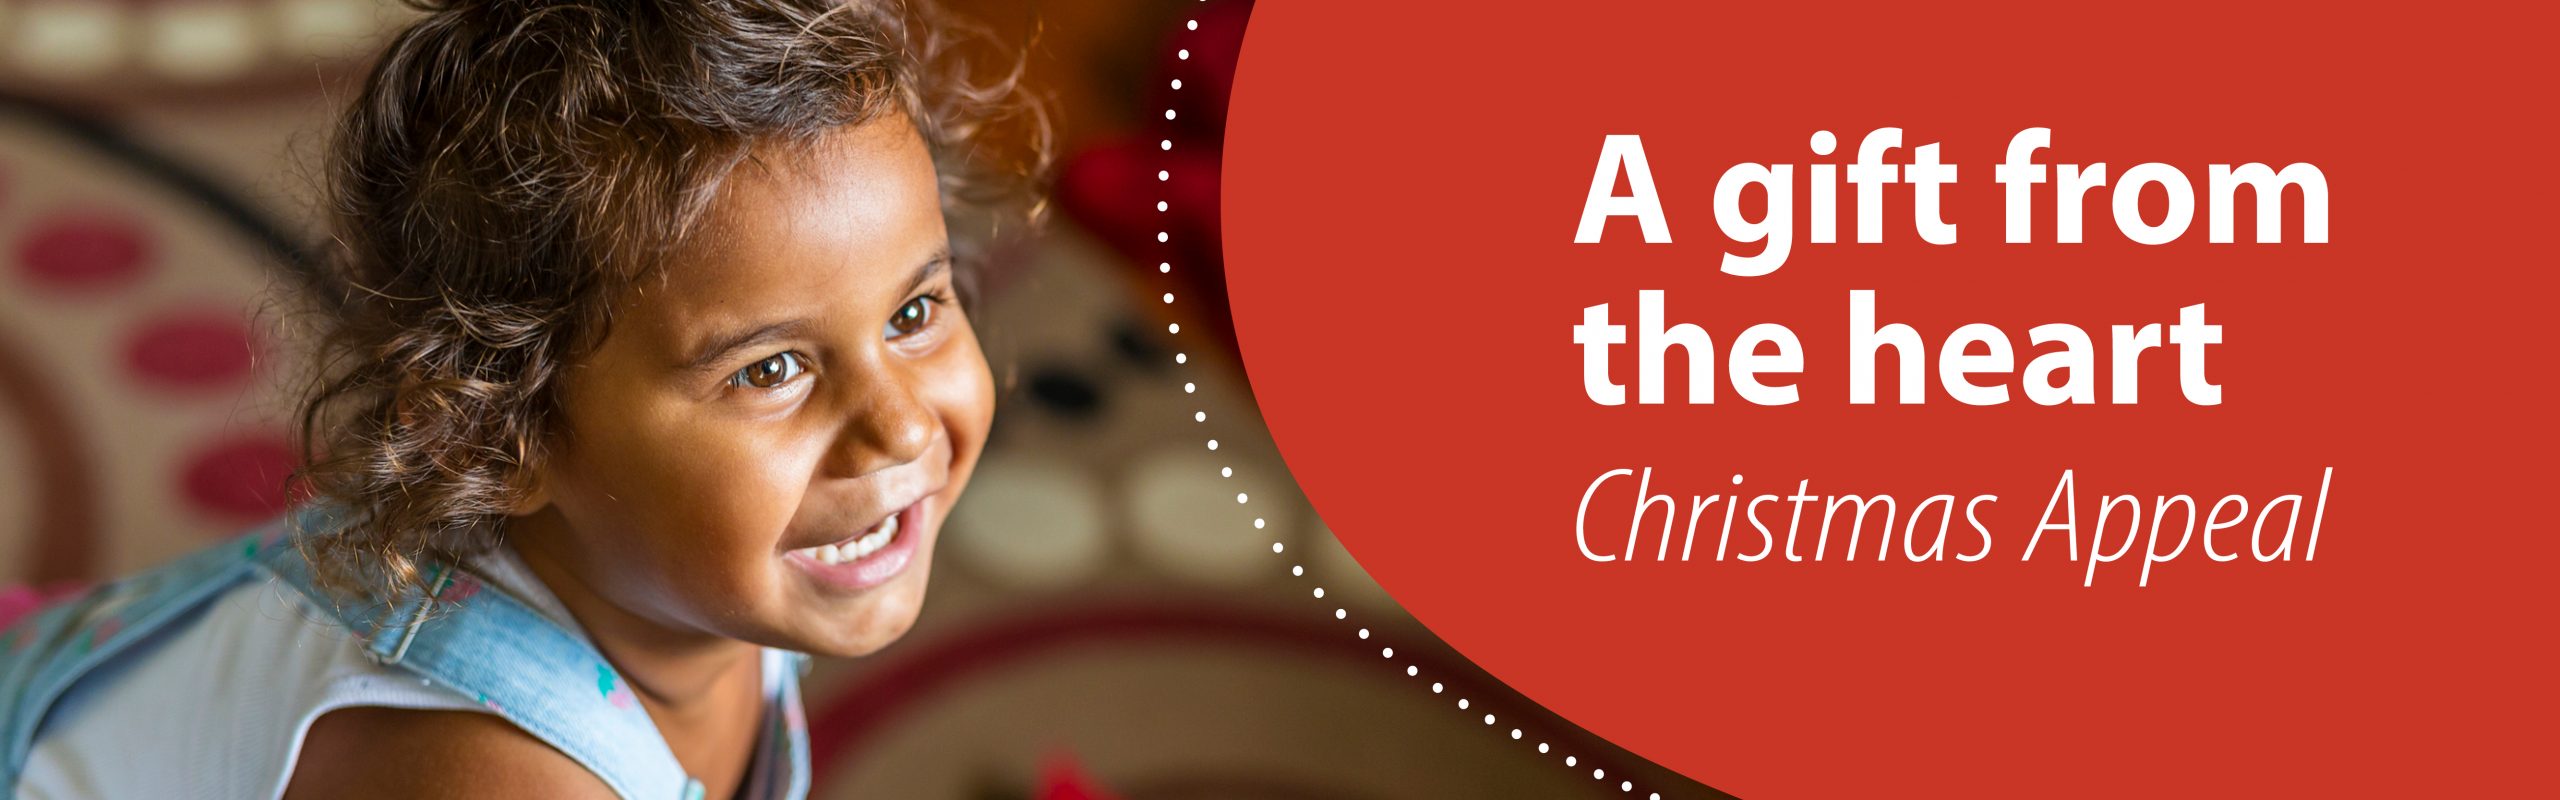 A Gift from the Heart Christmas Appeal